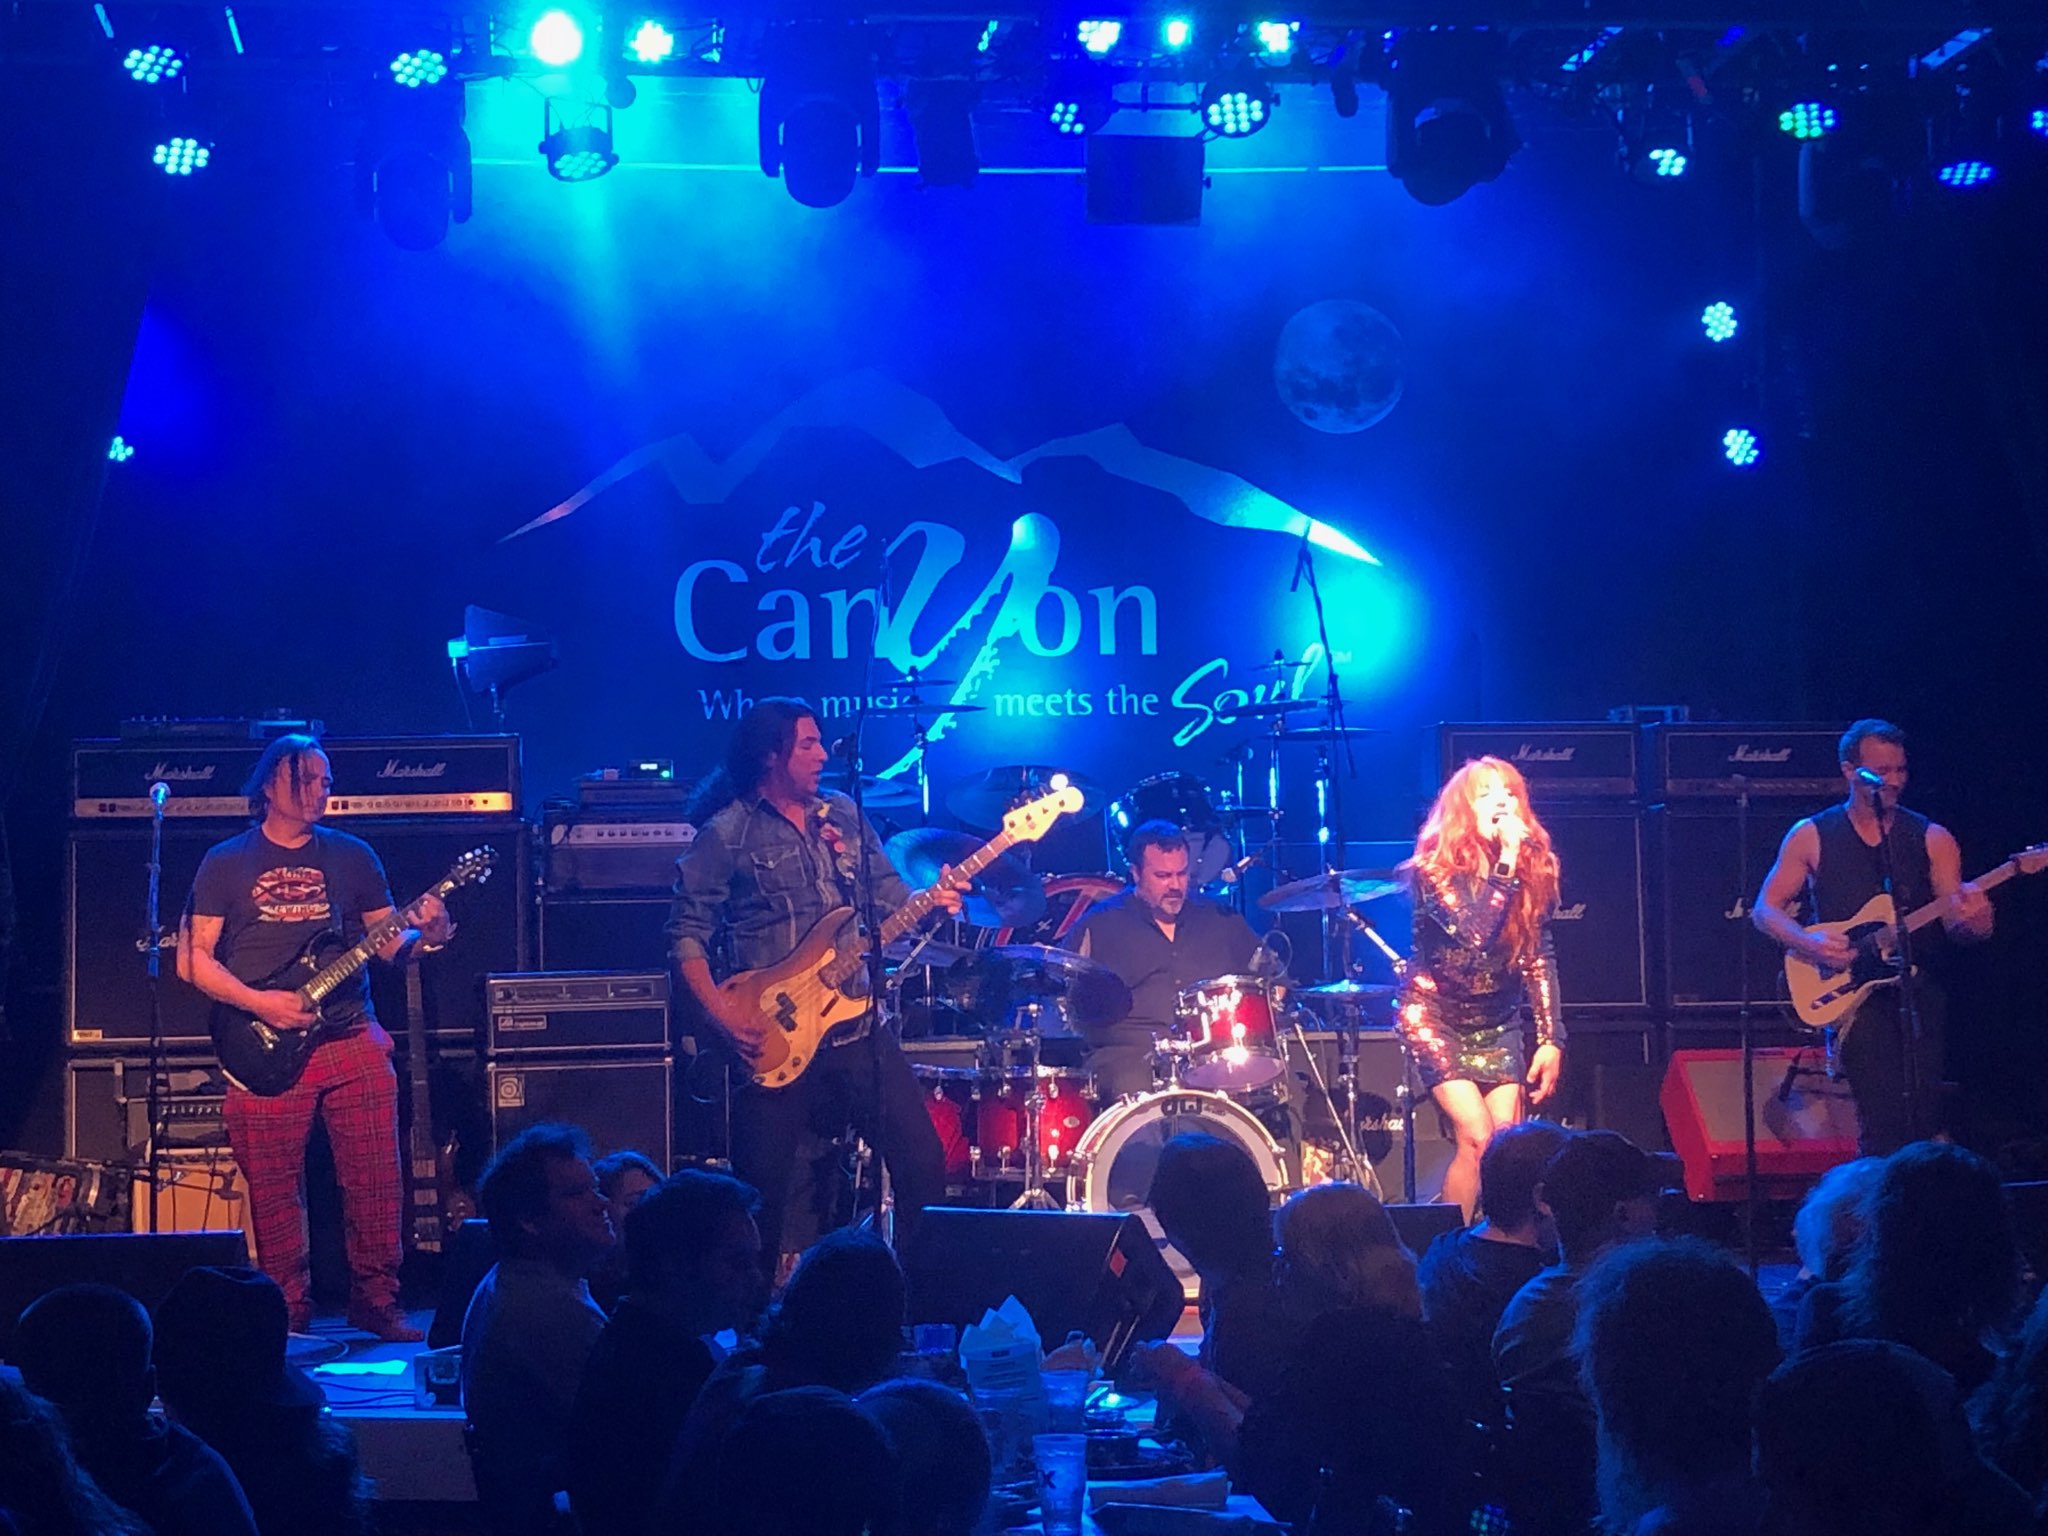 Performing at The Canyon in Agoura Hills, CA (1-26-19) Opening for Ace Frehley of KISS   photo by Matt Mellier